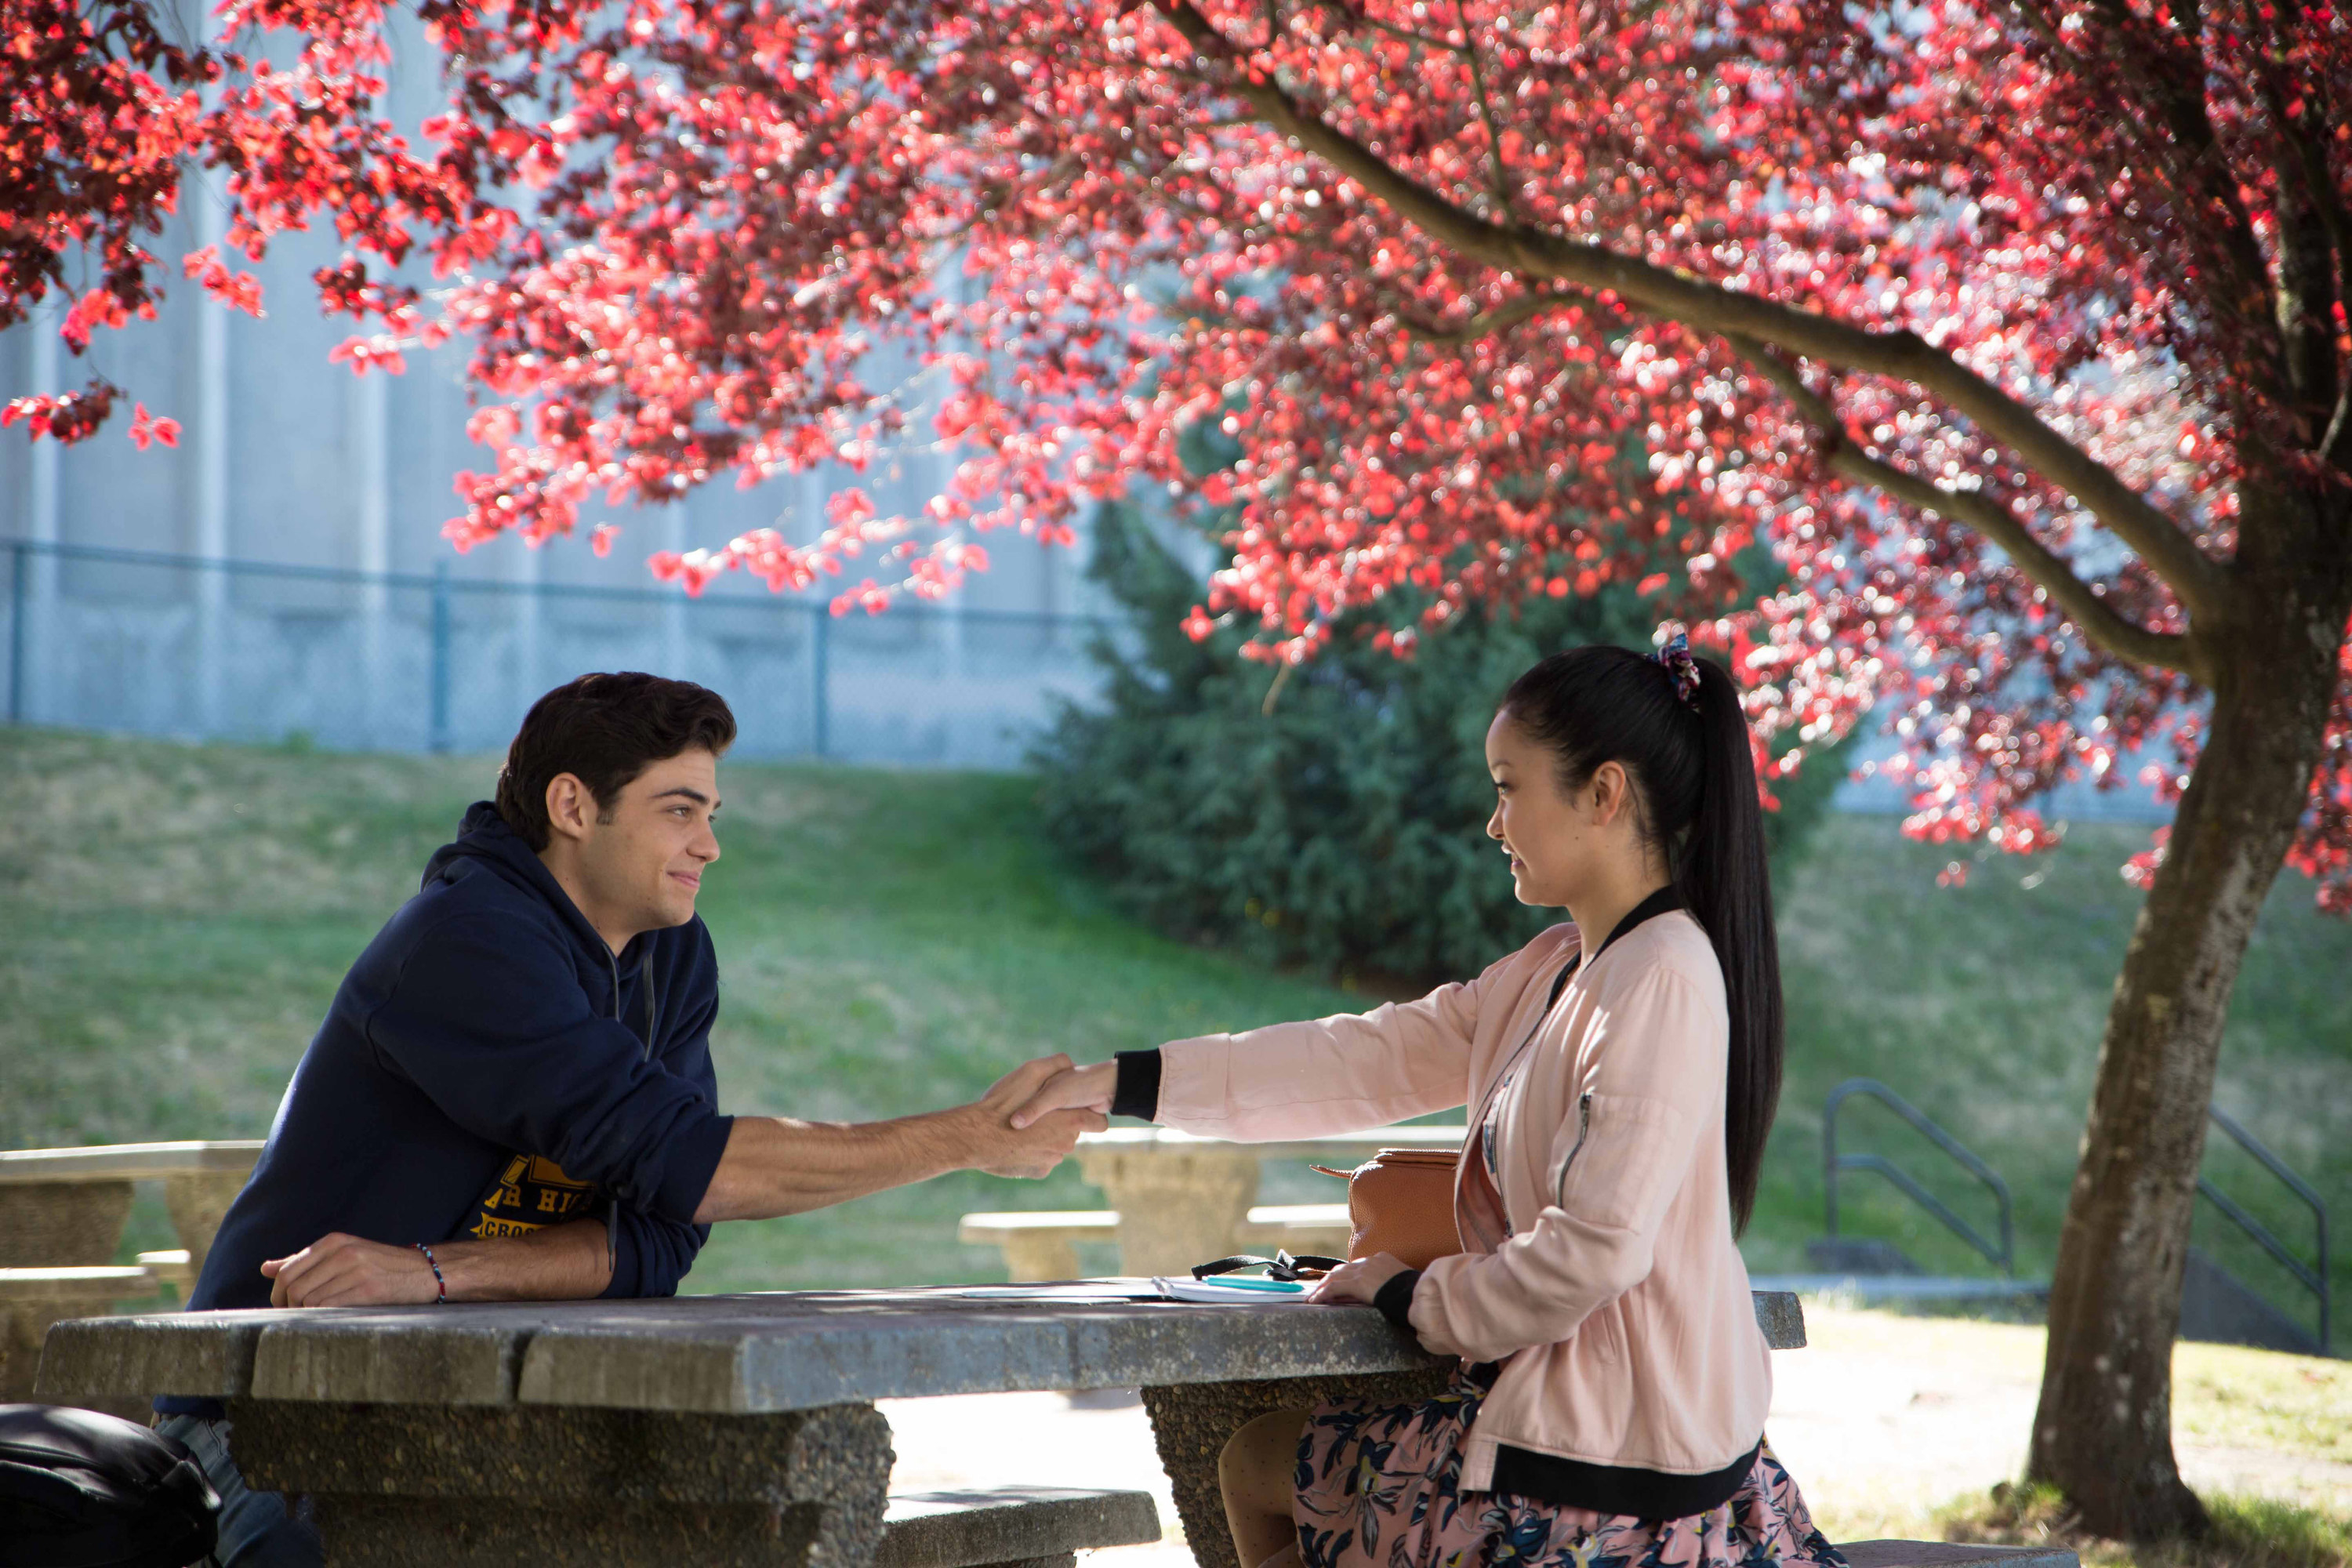 Peter and Lara Jean hold hands across a table